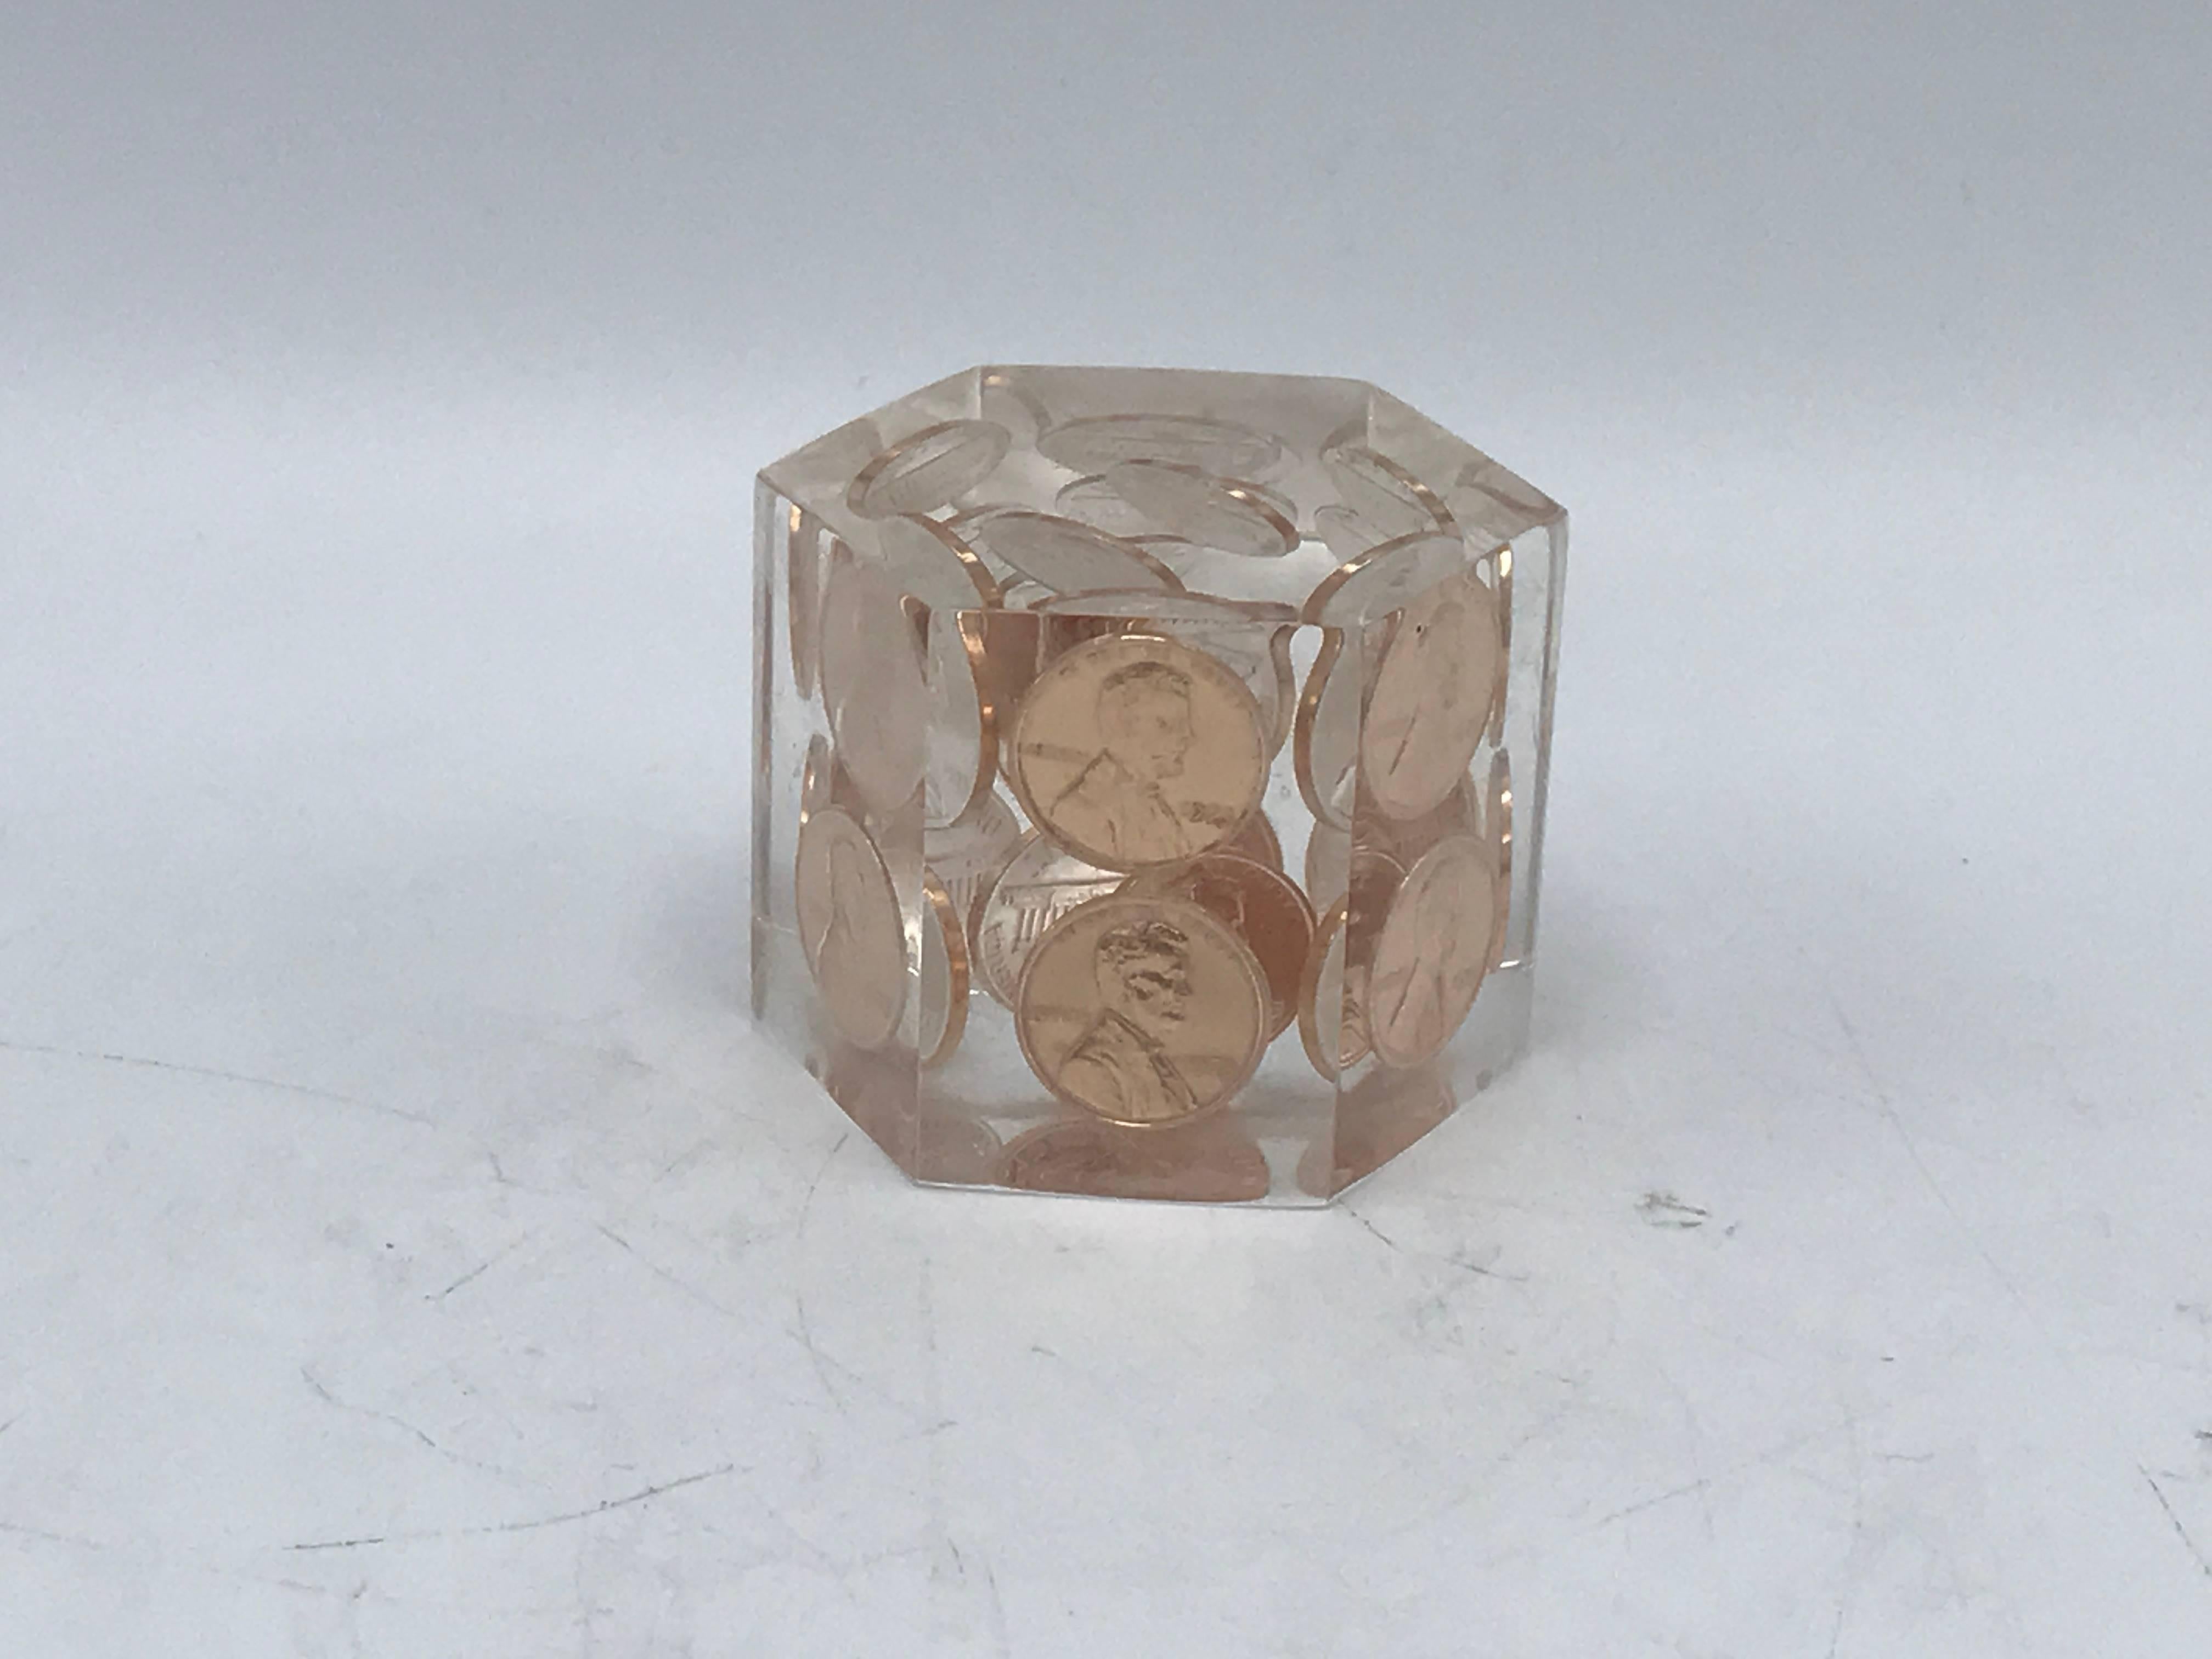 Offered is a 1980s pop-art Lucite paperweight with several US copper pennies encased within the Lucite. Hexagon shape.